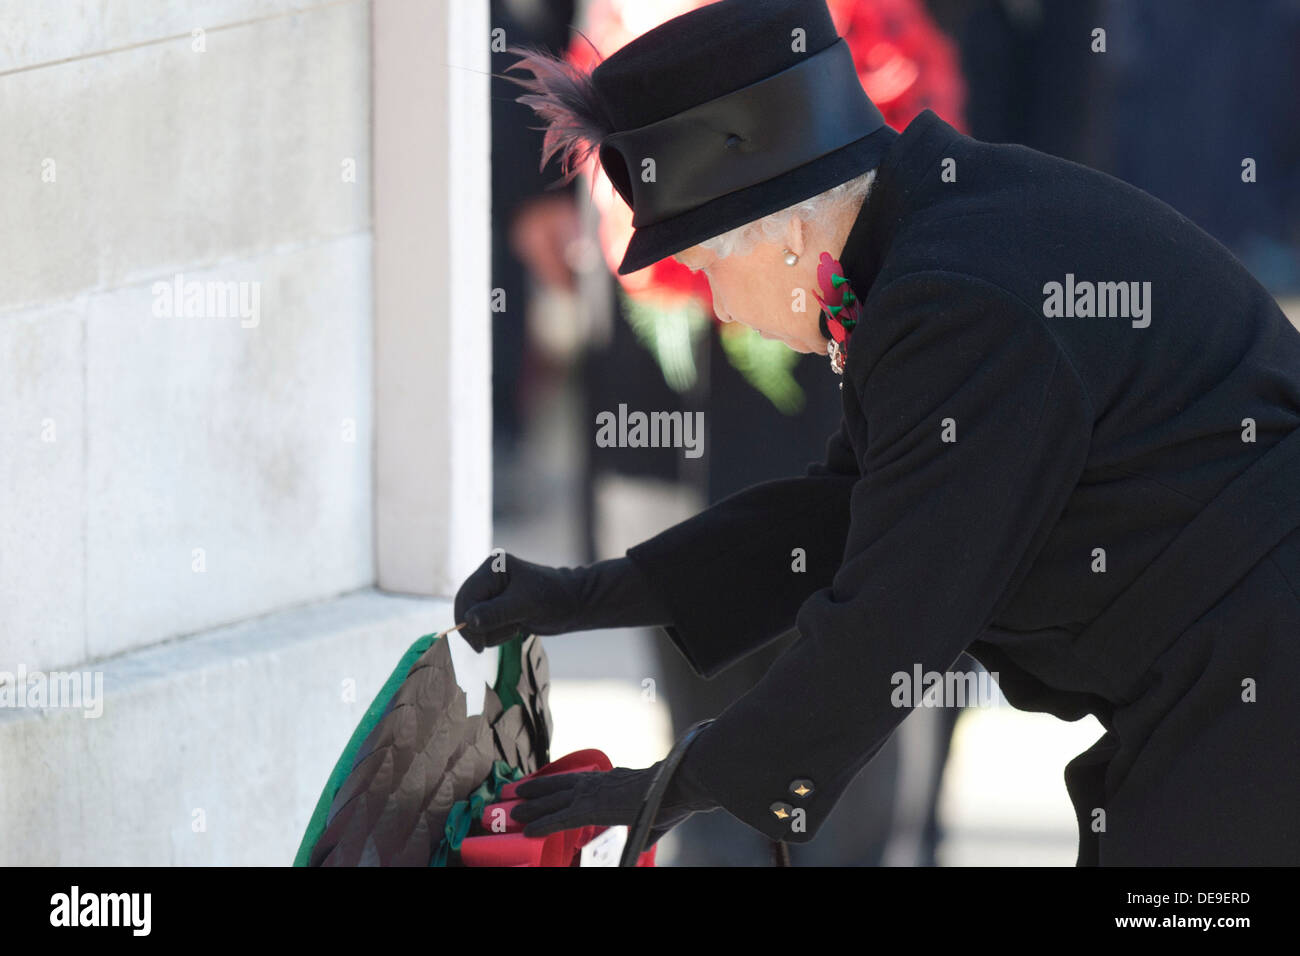 Queen Elizabeth II pays her respect at the Cenotaph war memorial on Remembrance Sunday service in Whitehall, Central London, Stock Photo